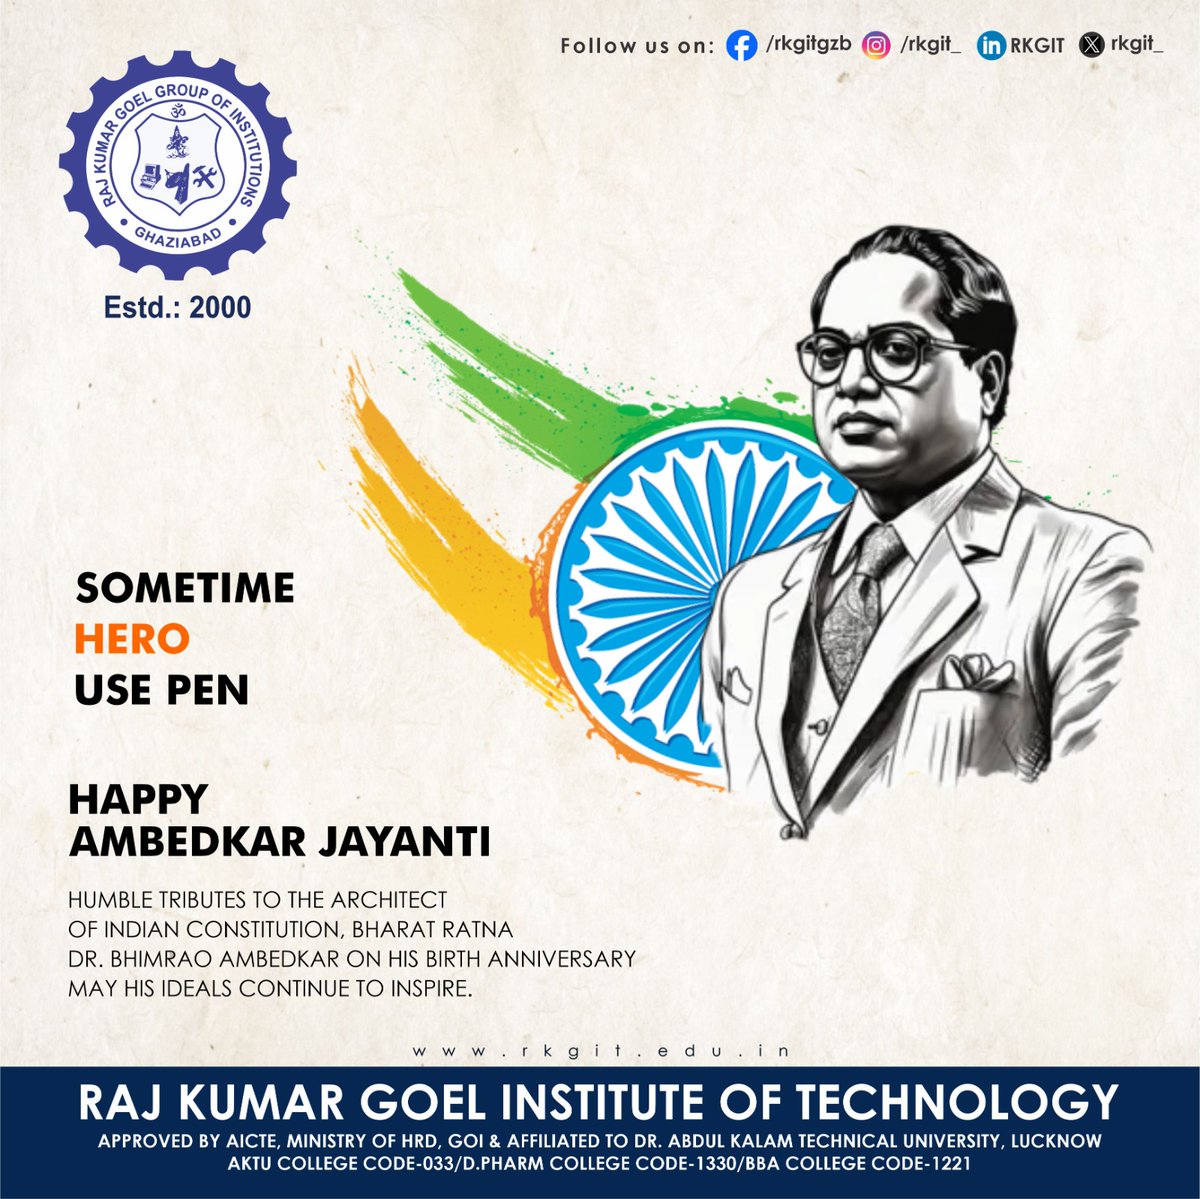 On this Ambedkar Jayanti, let’s remember Dr. B.R. Ambedkar’s fight for social justice and equality. May his ideals continue to inspire us!
#rkgit #india #topbtechinstitute #BestEngineeringCollege #topplacementcollege #EngineeringInstitute #btechcollege #UttarPradesh